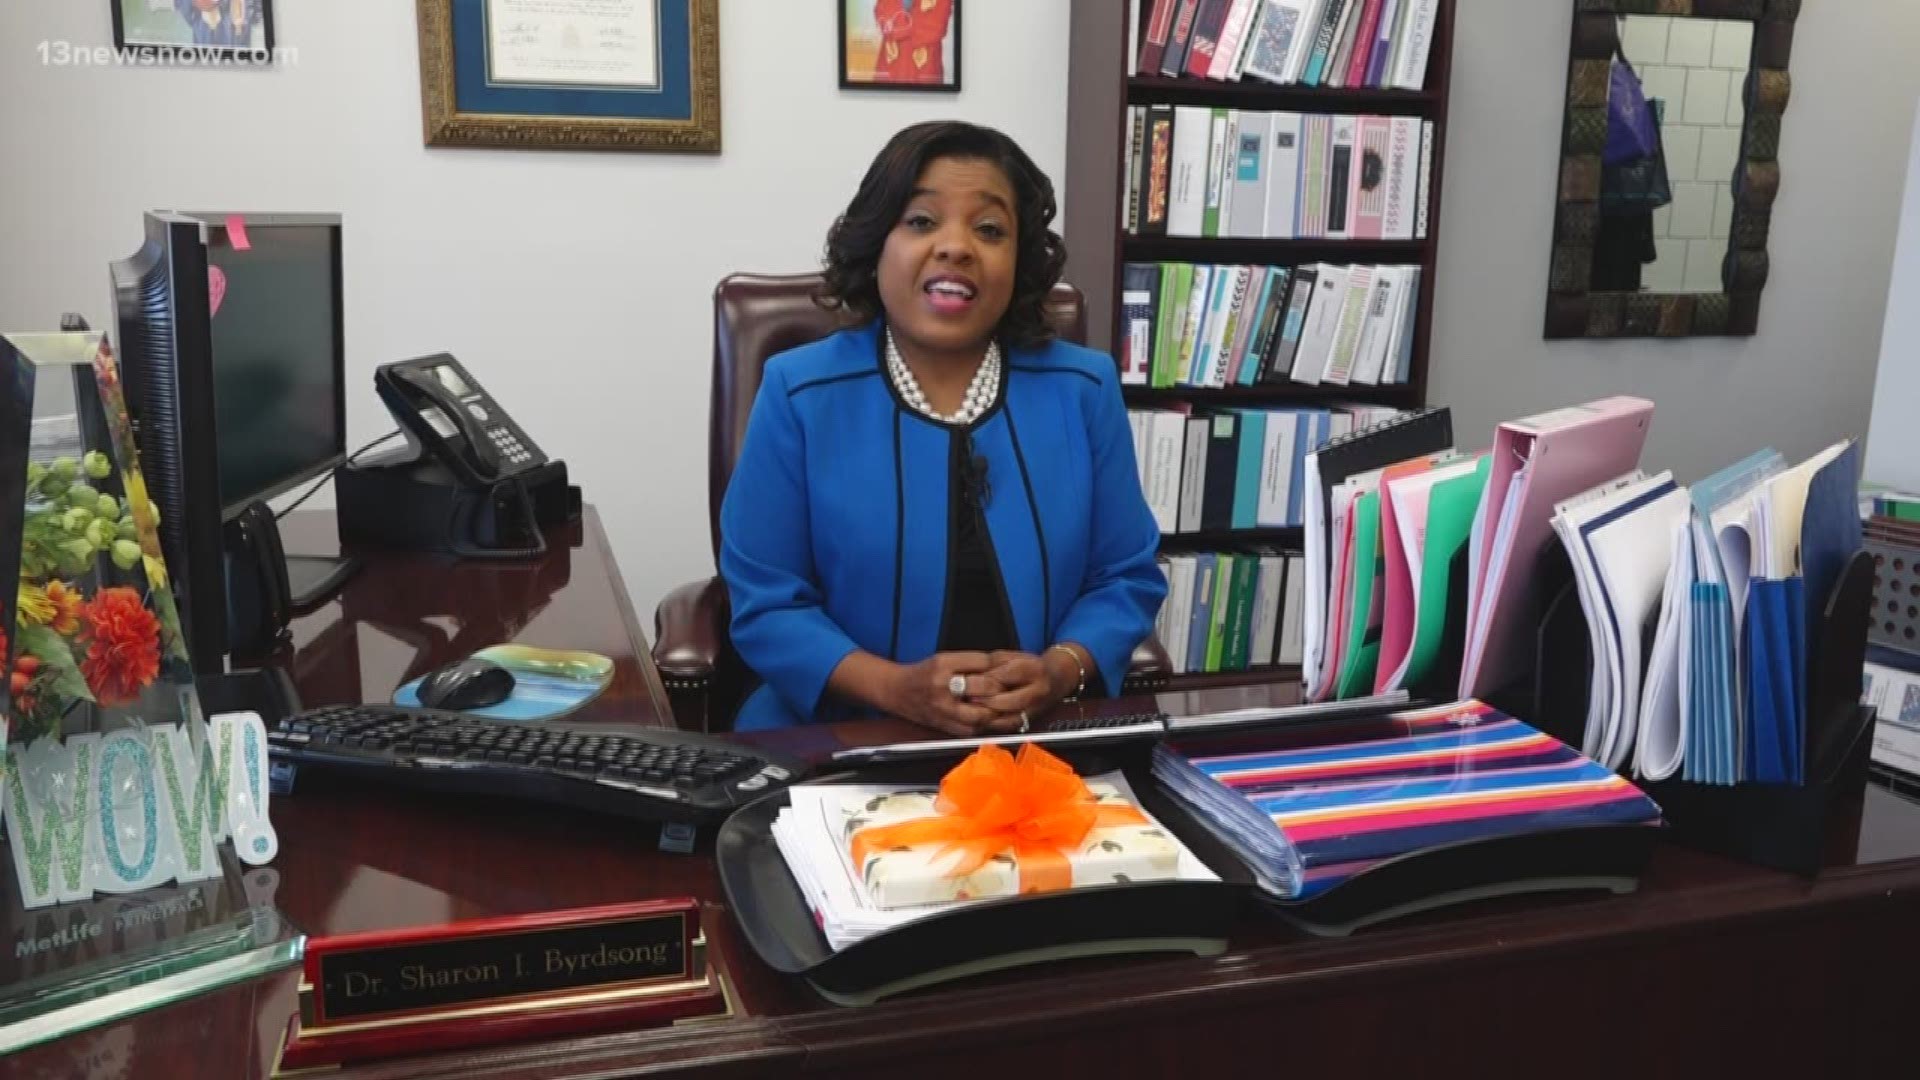 Dr. Sharon I. Byrdsong had been serving as interim superintendent for Norfolk Public Schools since June 2019.